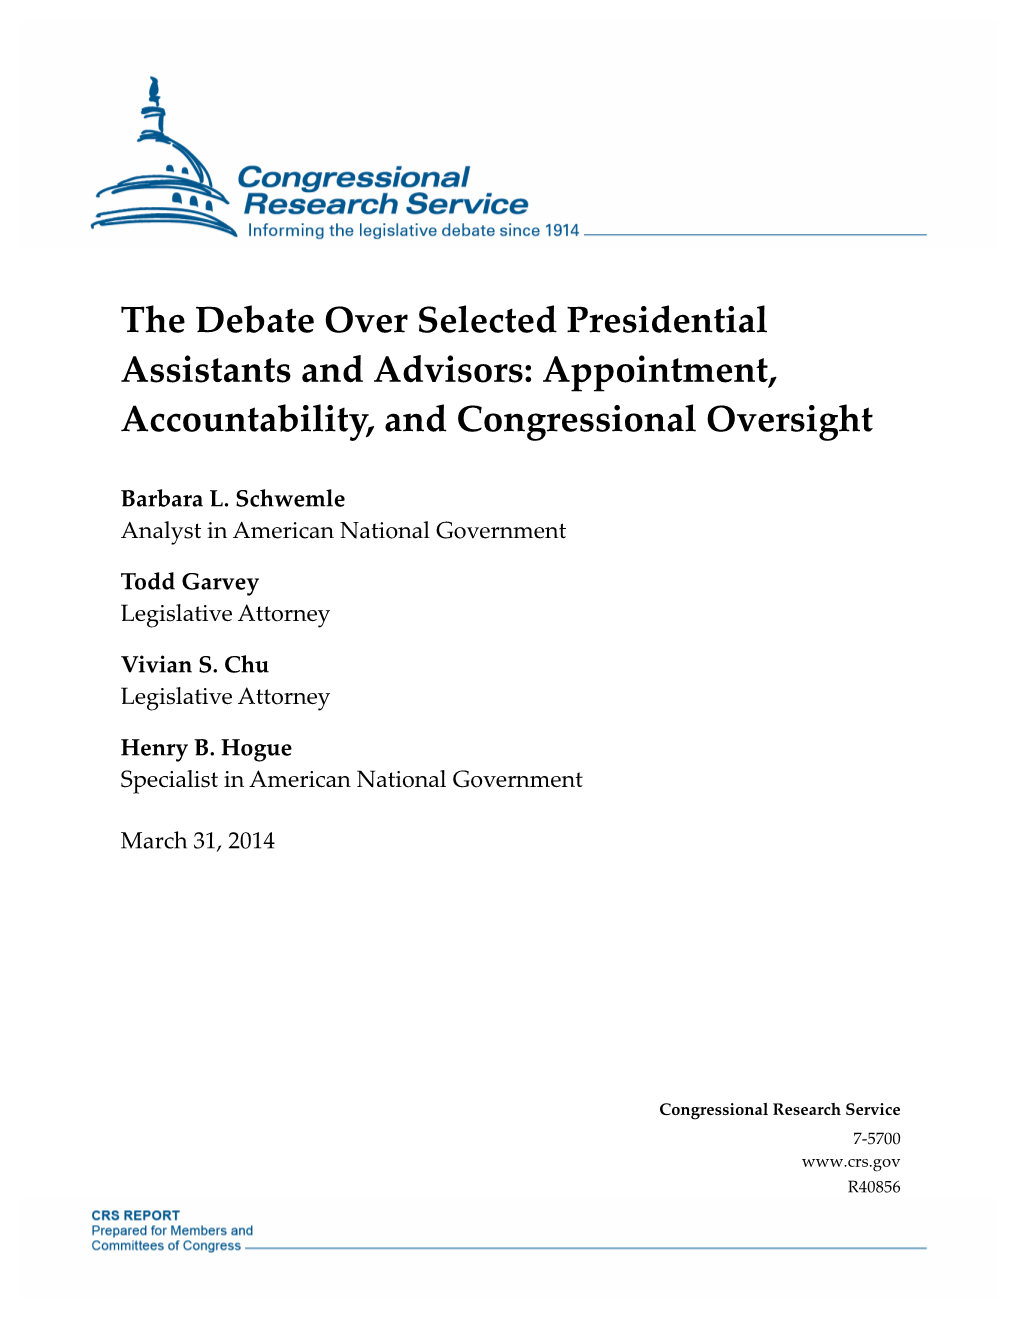 The Debate Over Selected Presidential Assistants and Advisors: Appointment, Accountability, and Congressional Oversight